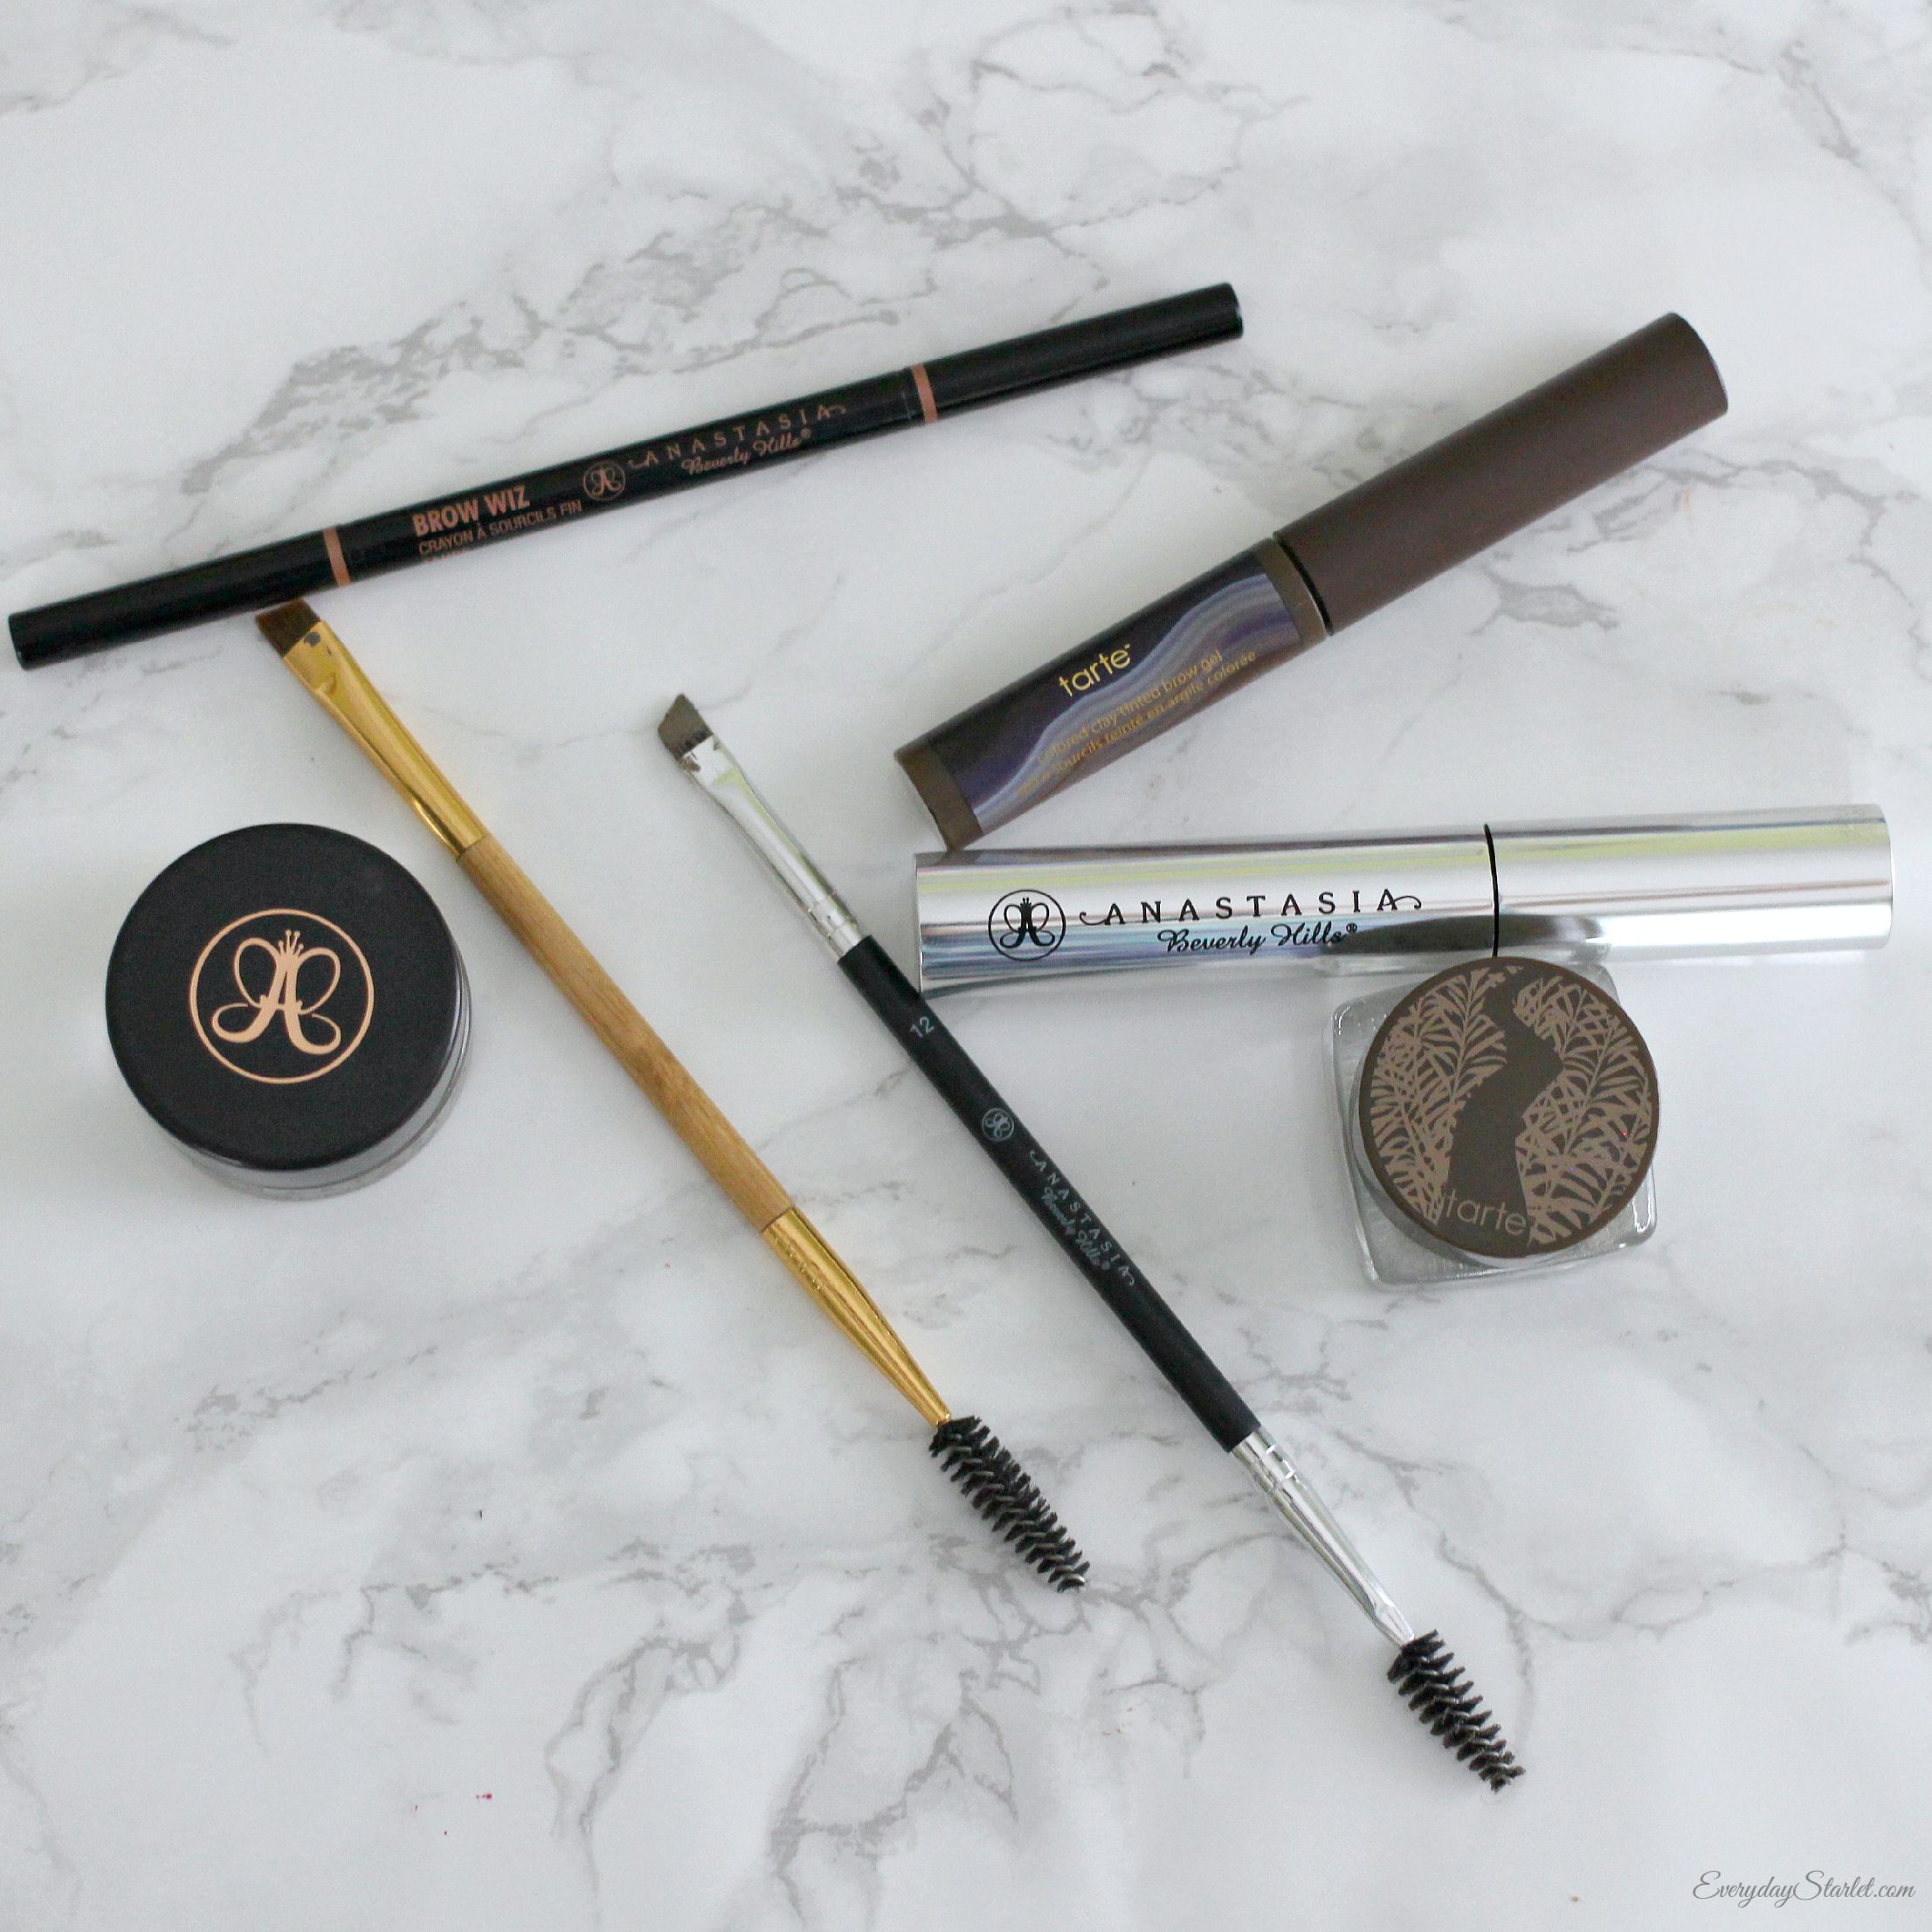 Brow Wardrobe: All the Brow Products You’ll Ever Need